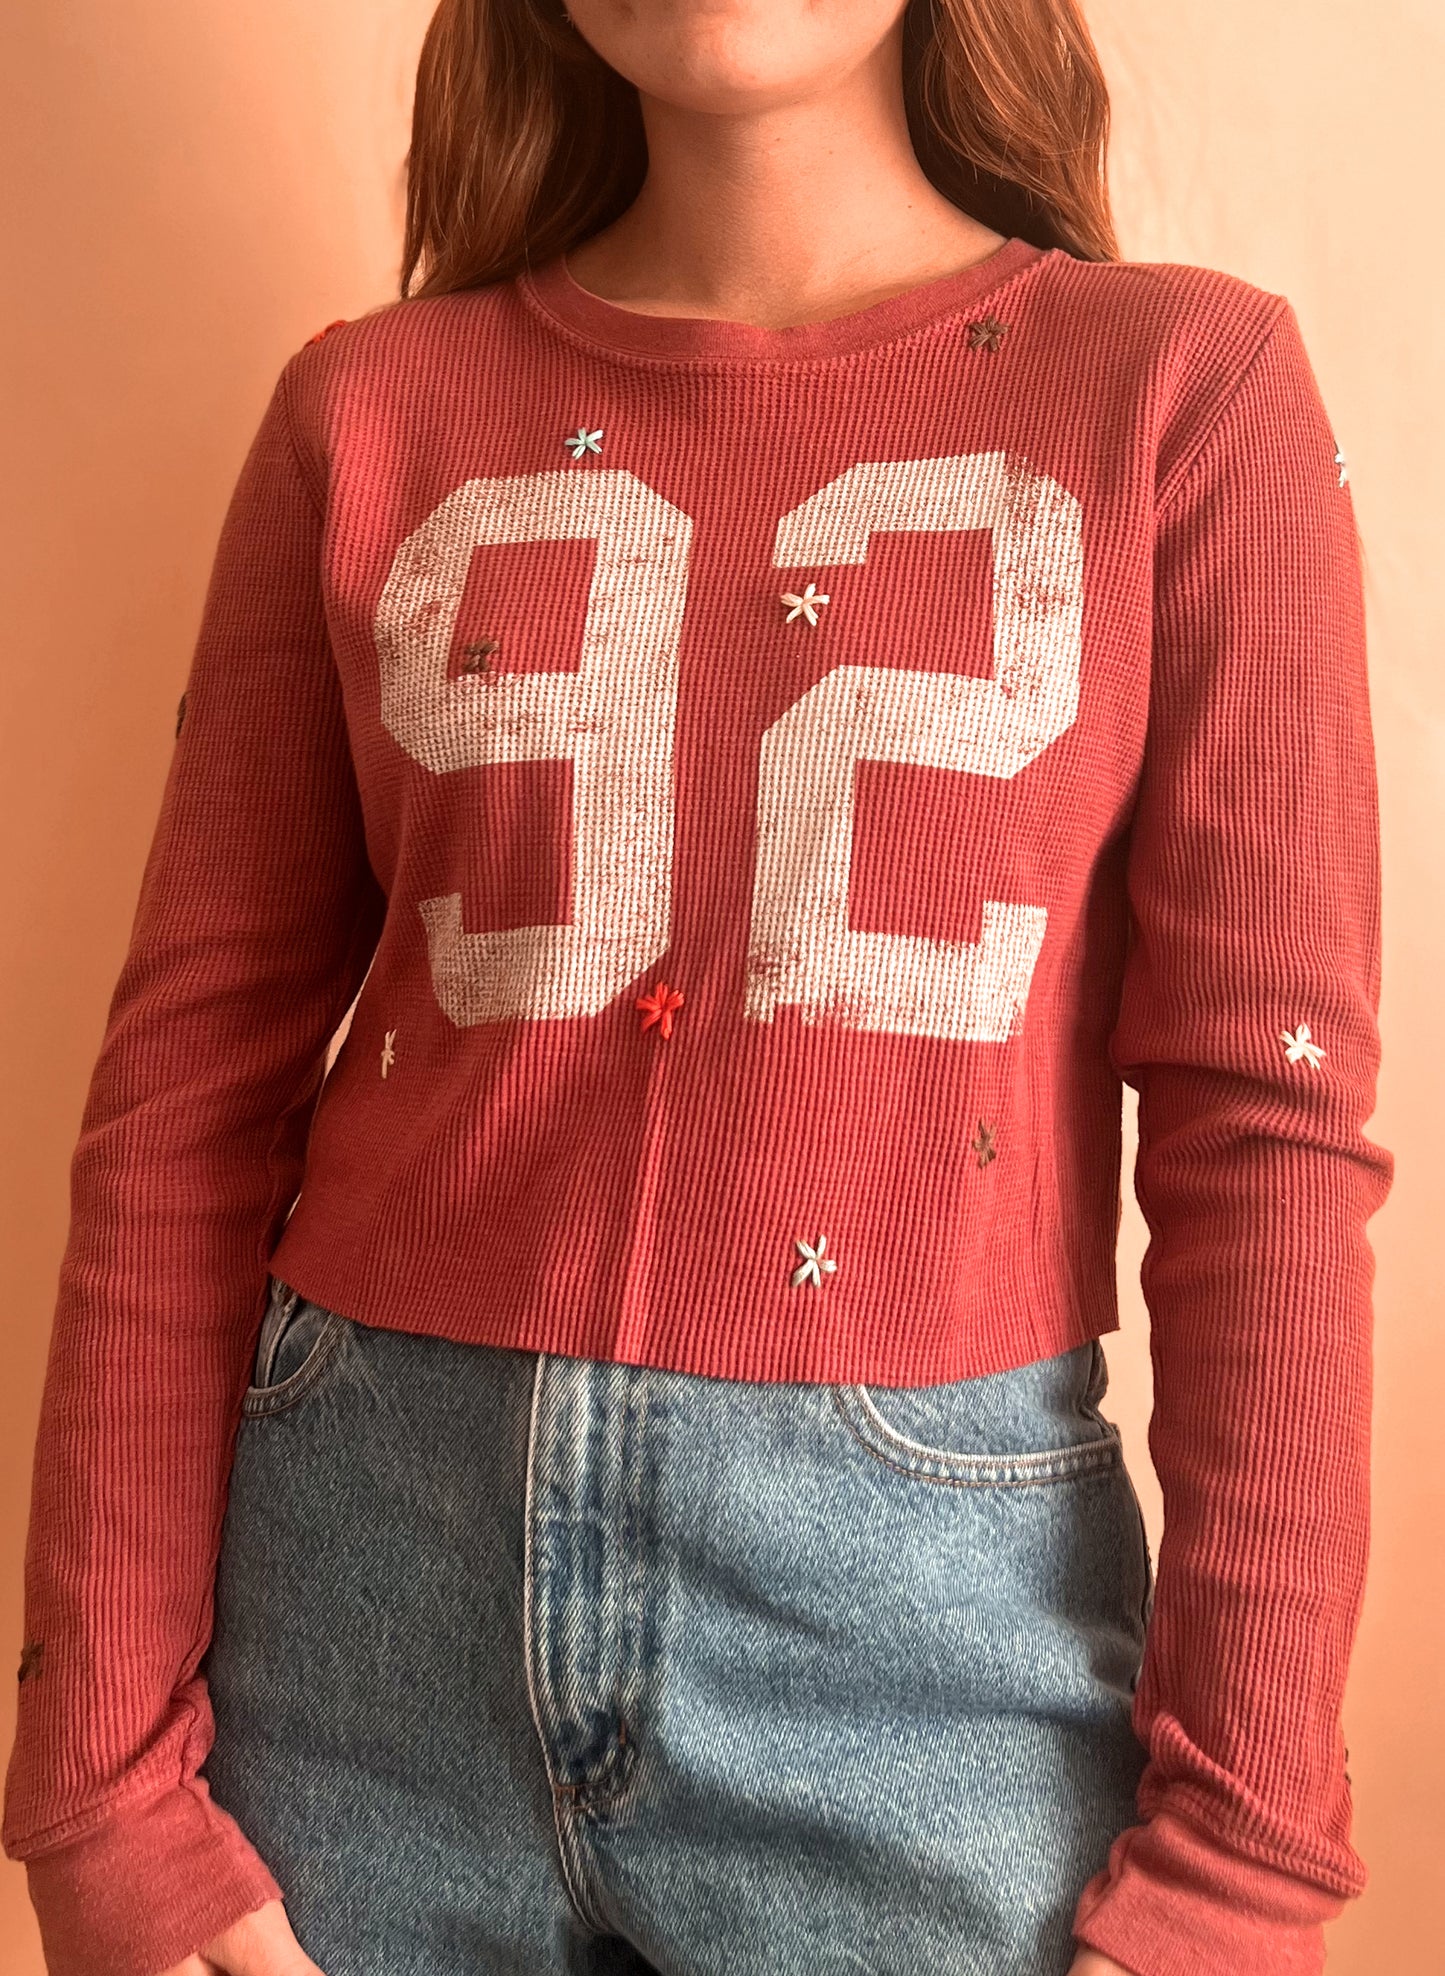 Anthropologie '92 LS Cropped Thermal